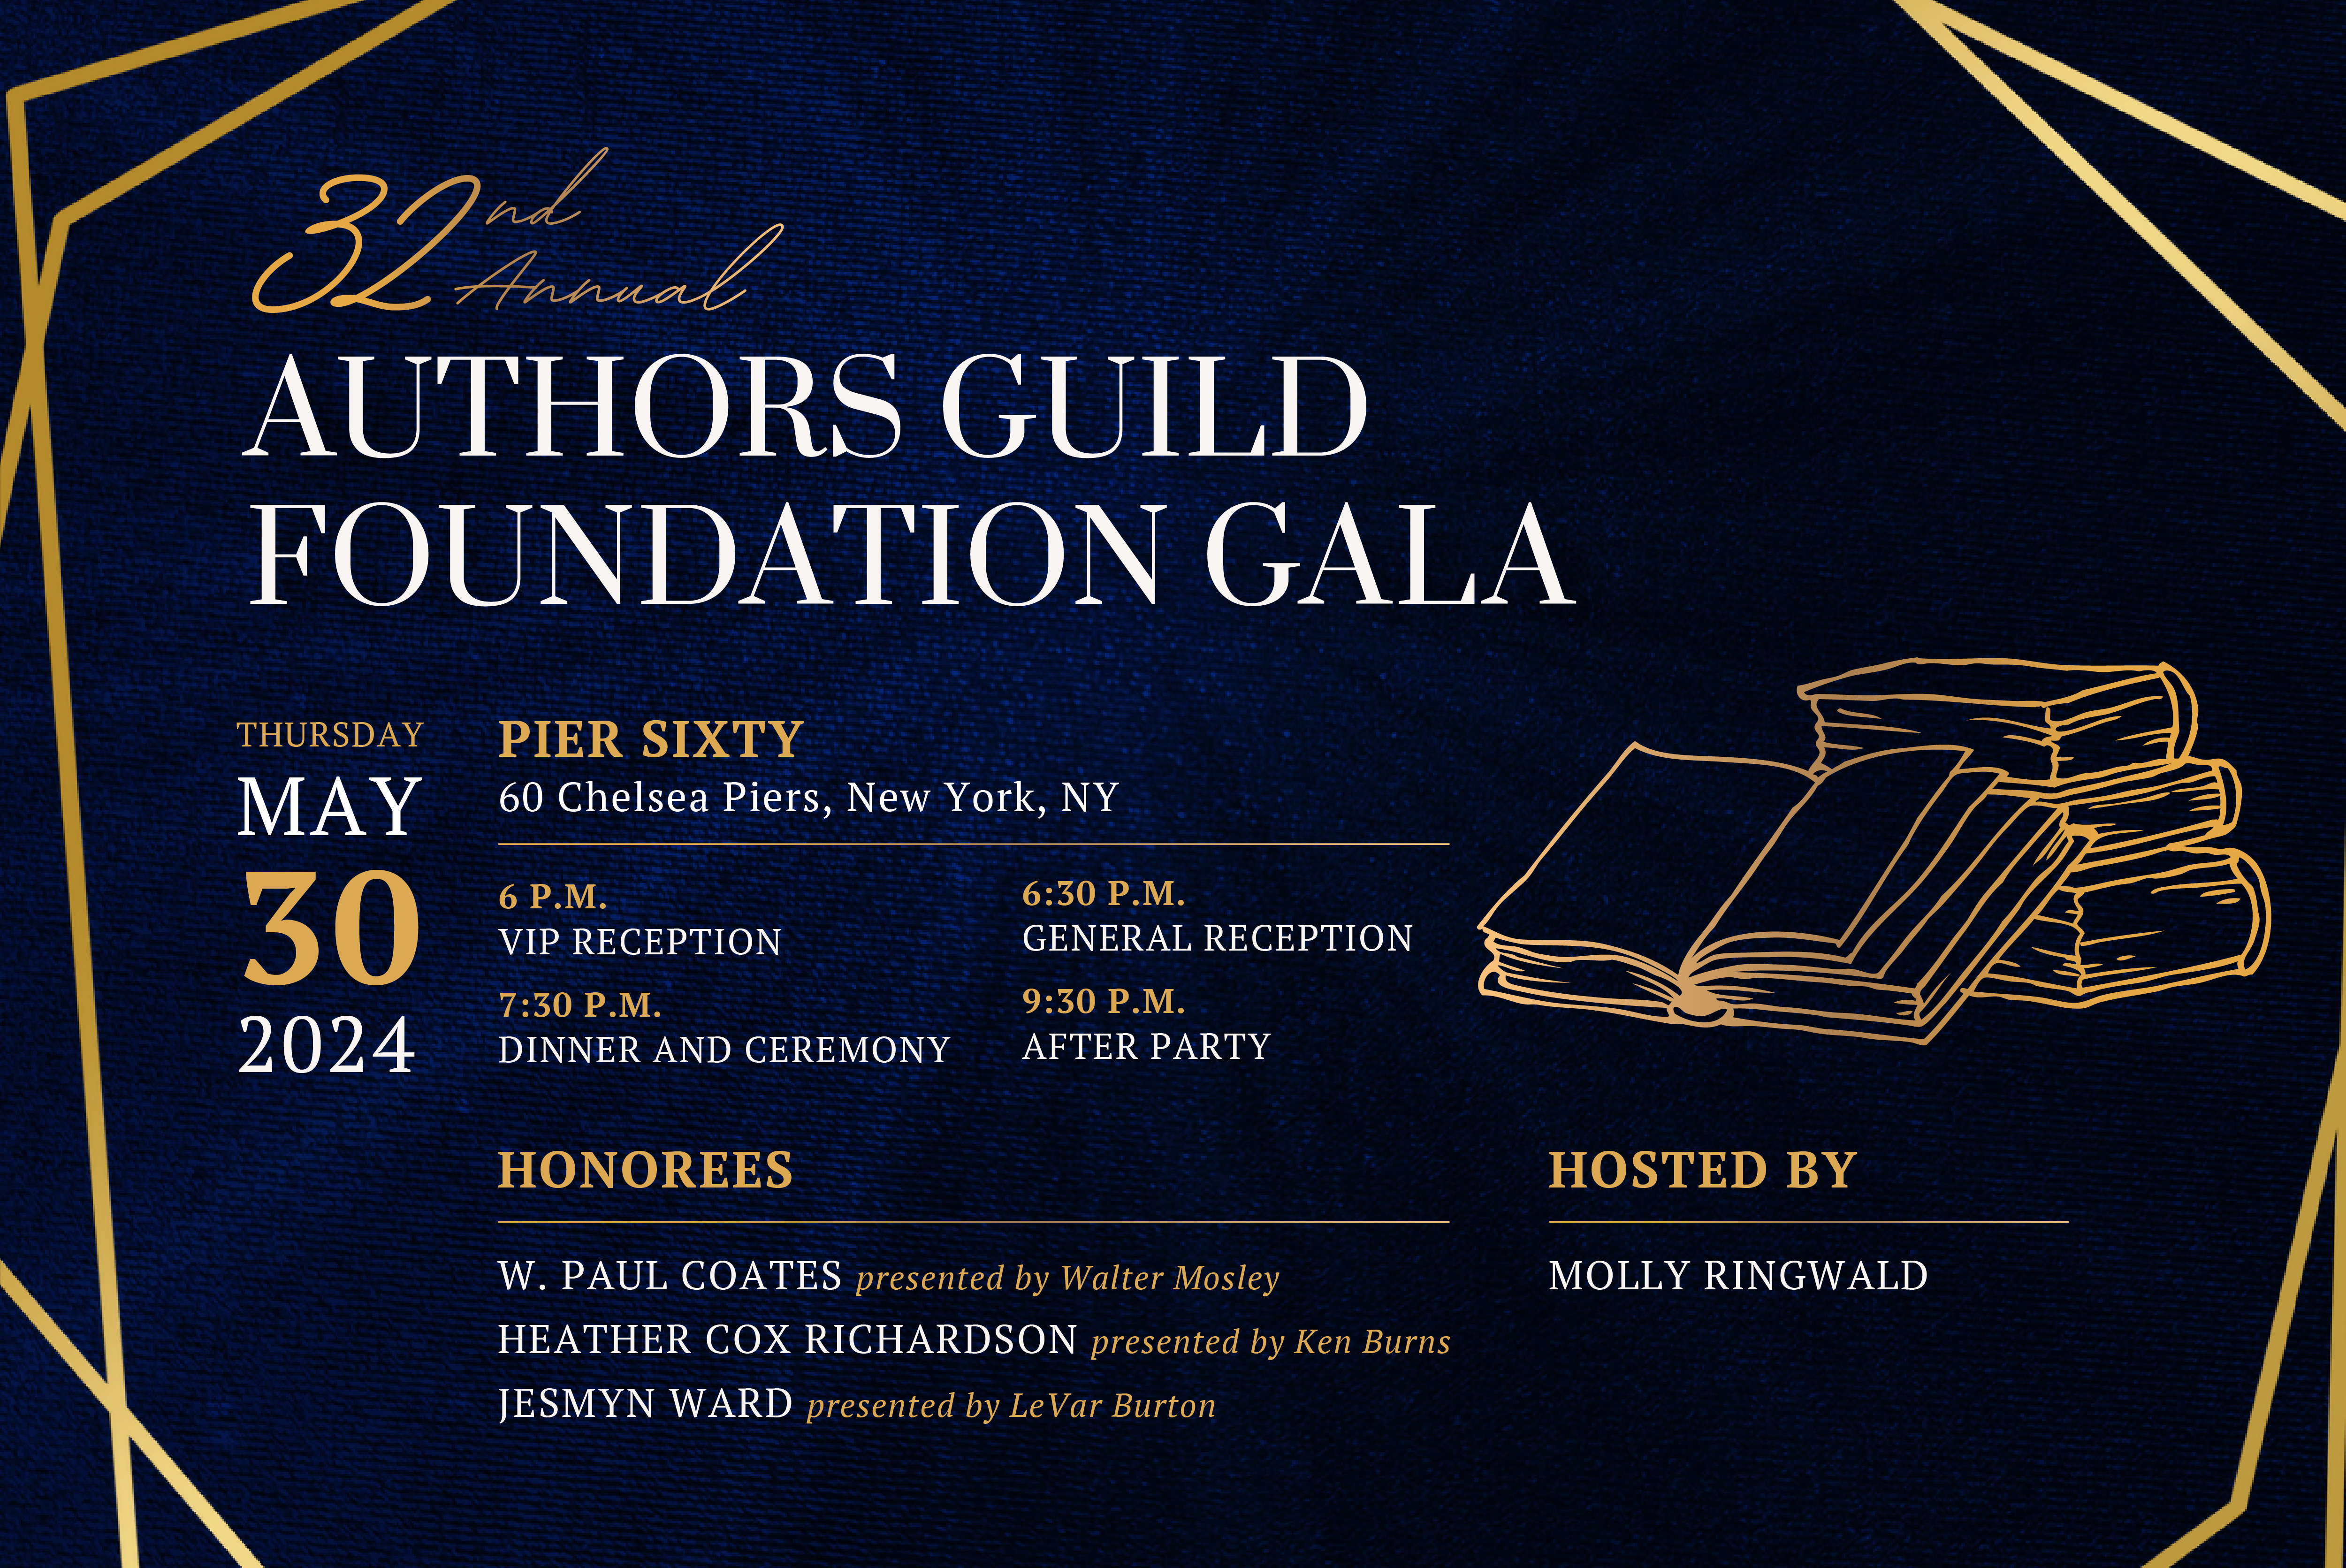 32nd Annual Authors Guild Foundation Gala